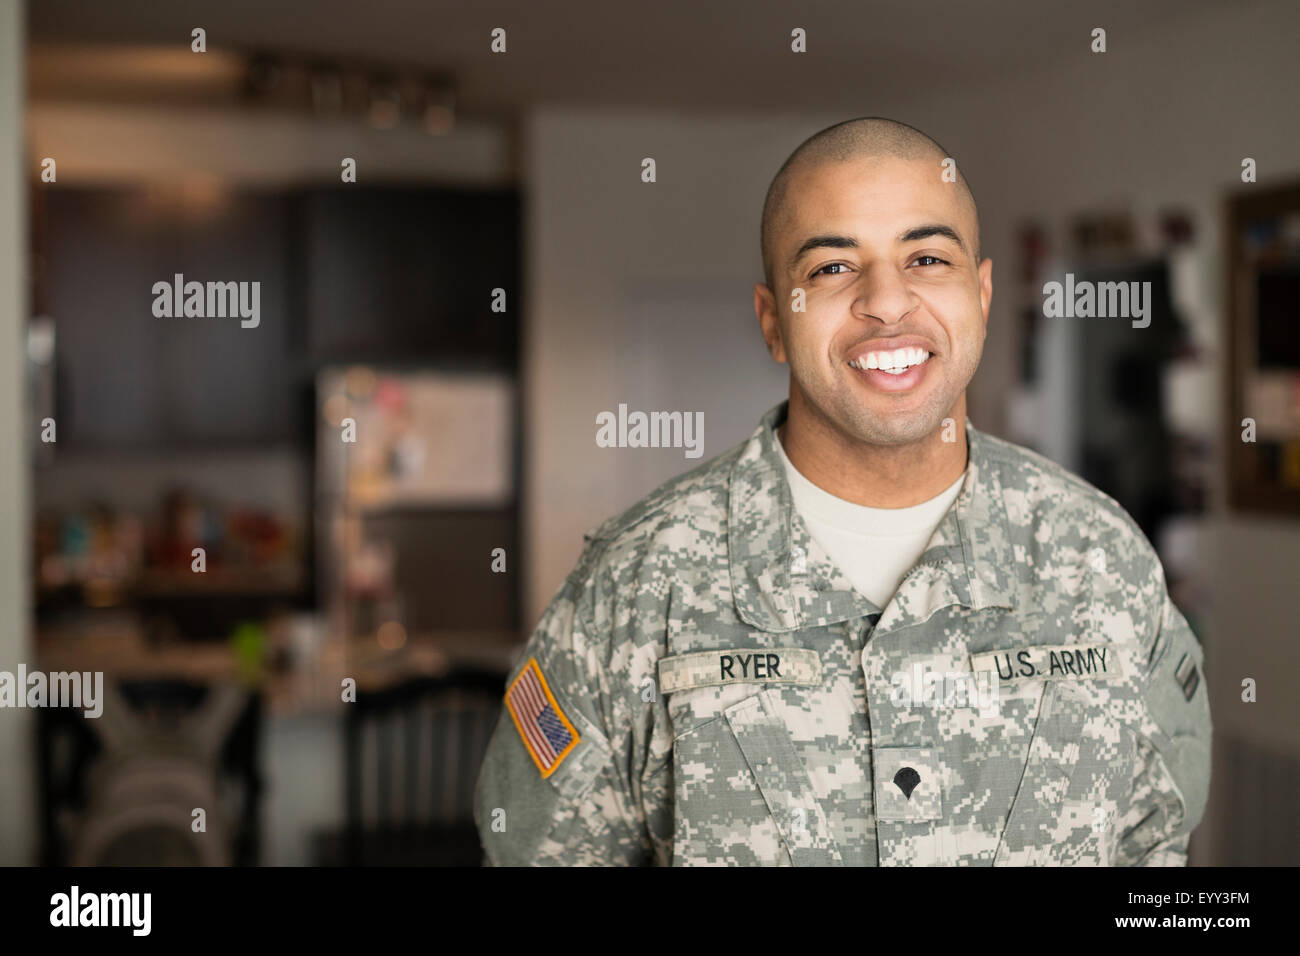 Mixed race man smiling in living room Stock Photo